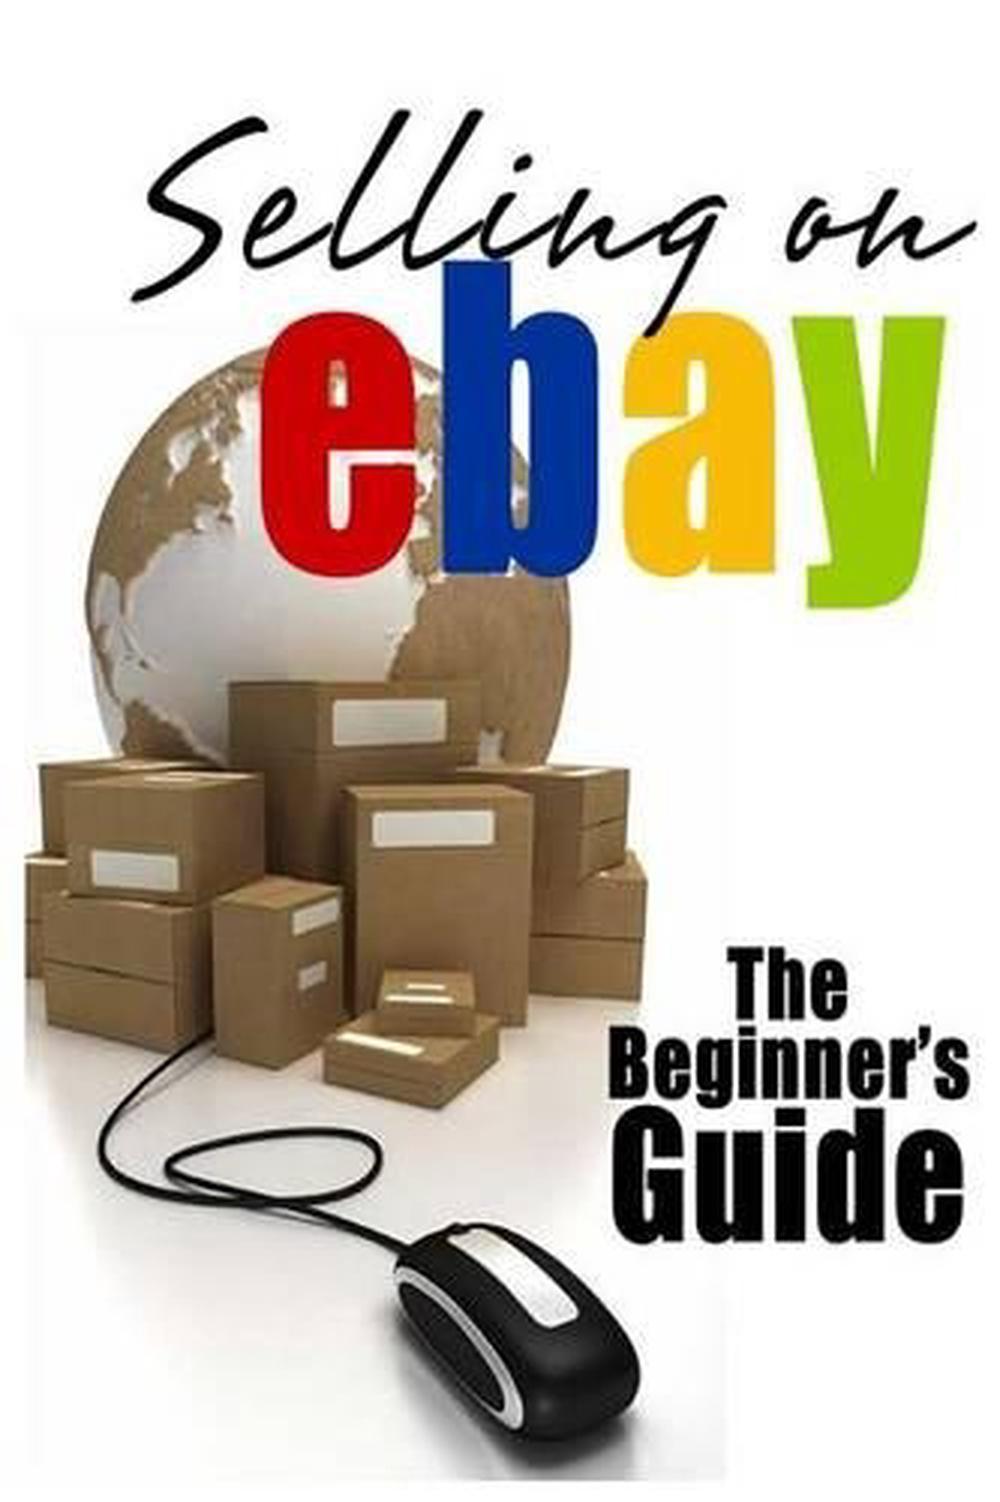 Selling on Ebay The Beginner's Guide for How to Sell on Ebay by Brian